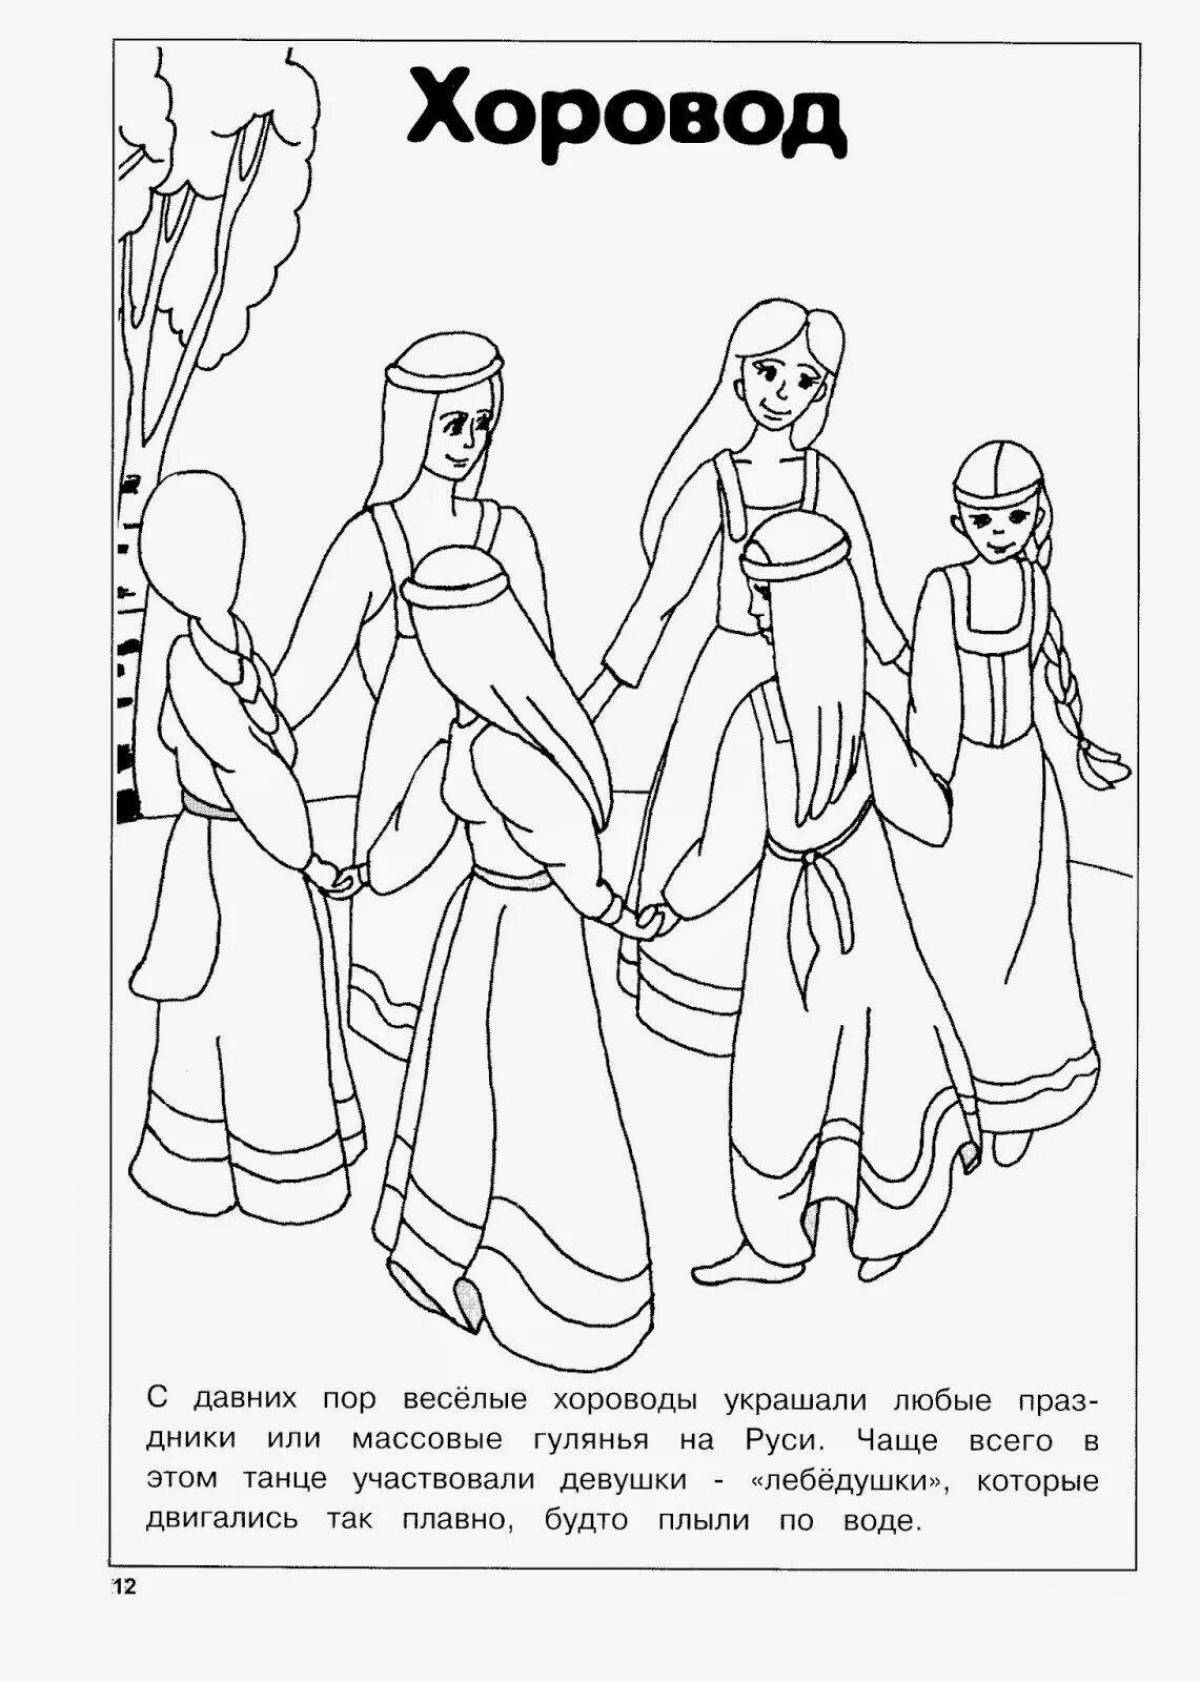 Coloring page enthusiastic round dance for kids